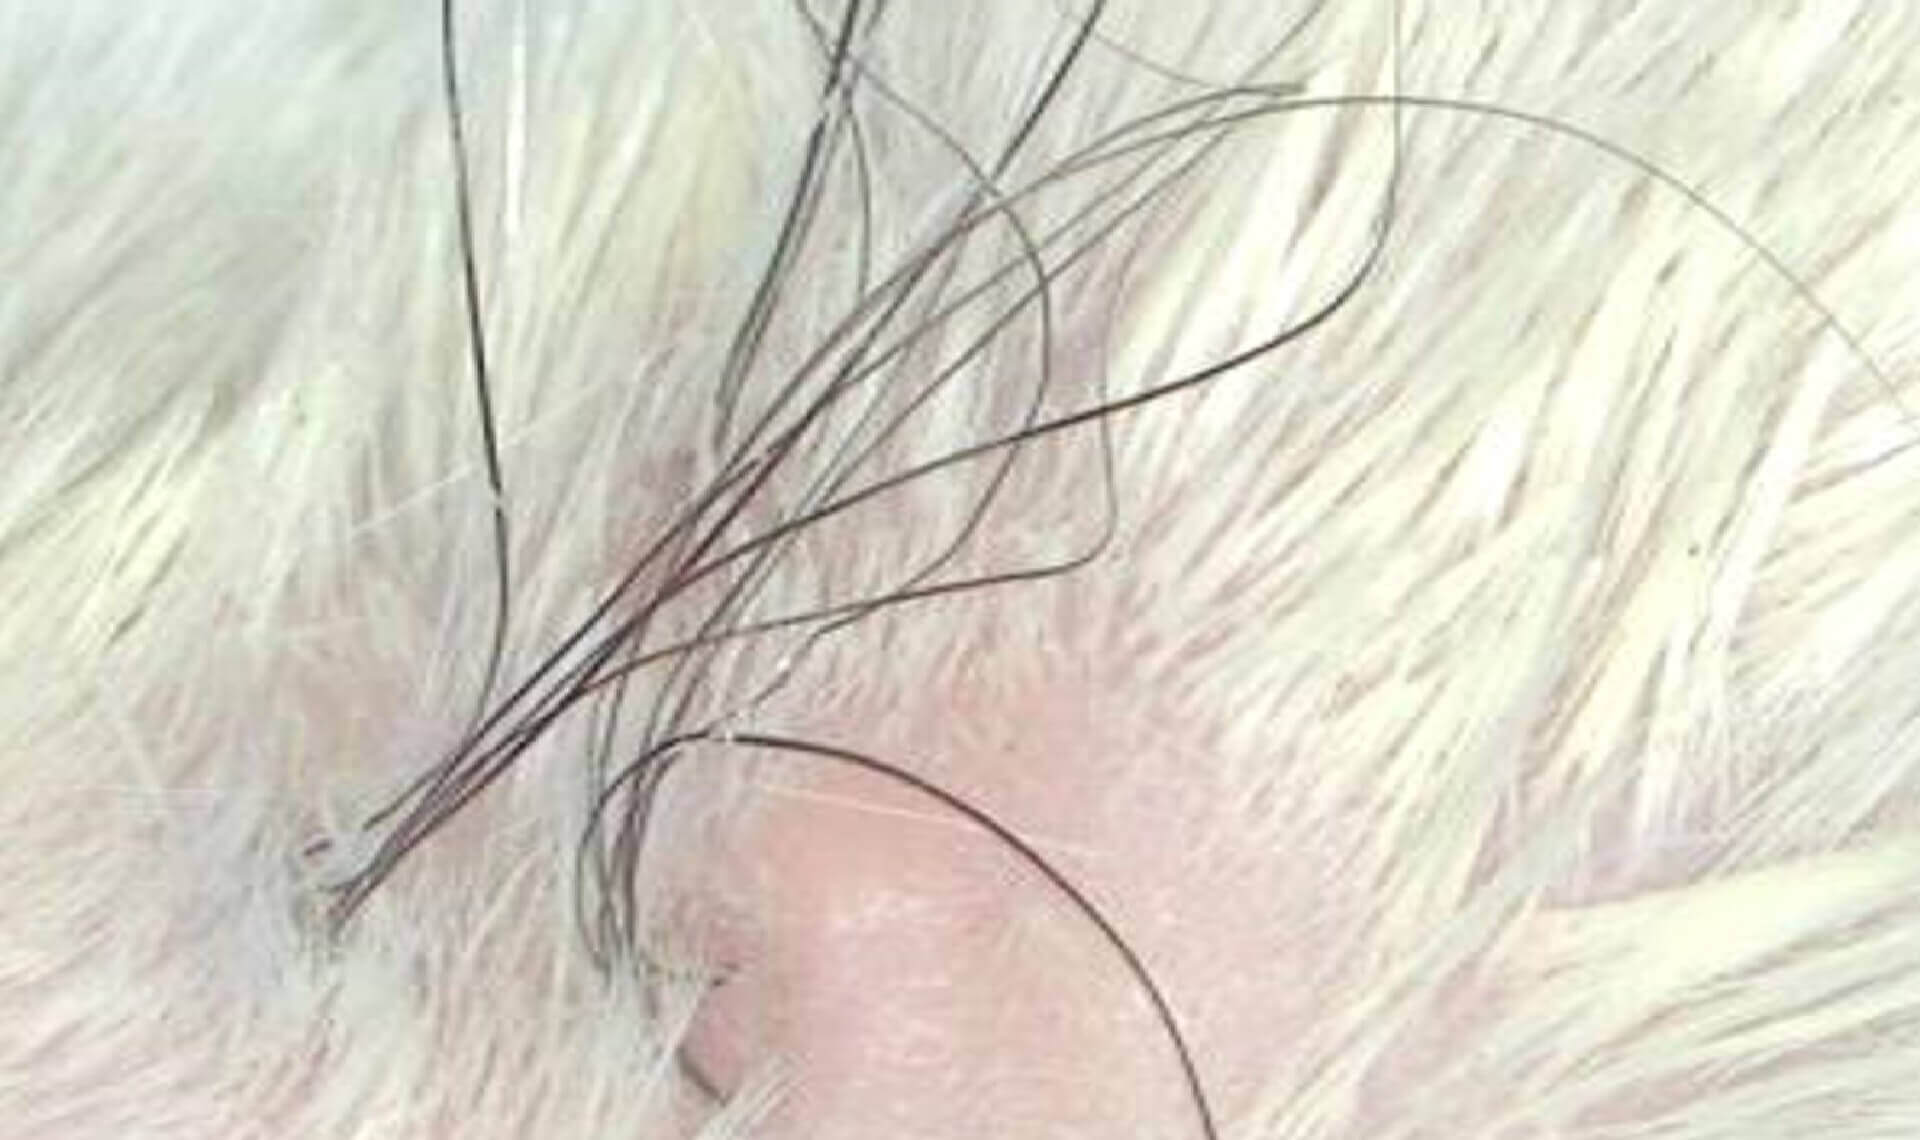 Healthy scalp skin xenotransplanted on mouse